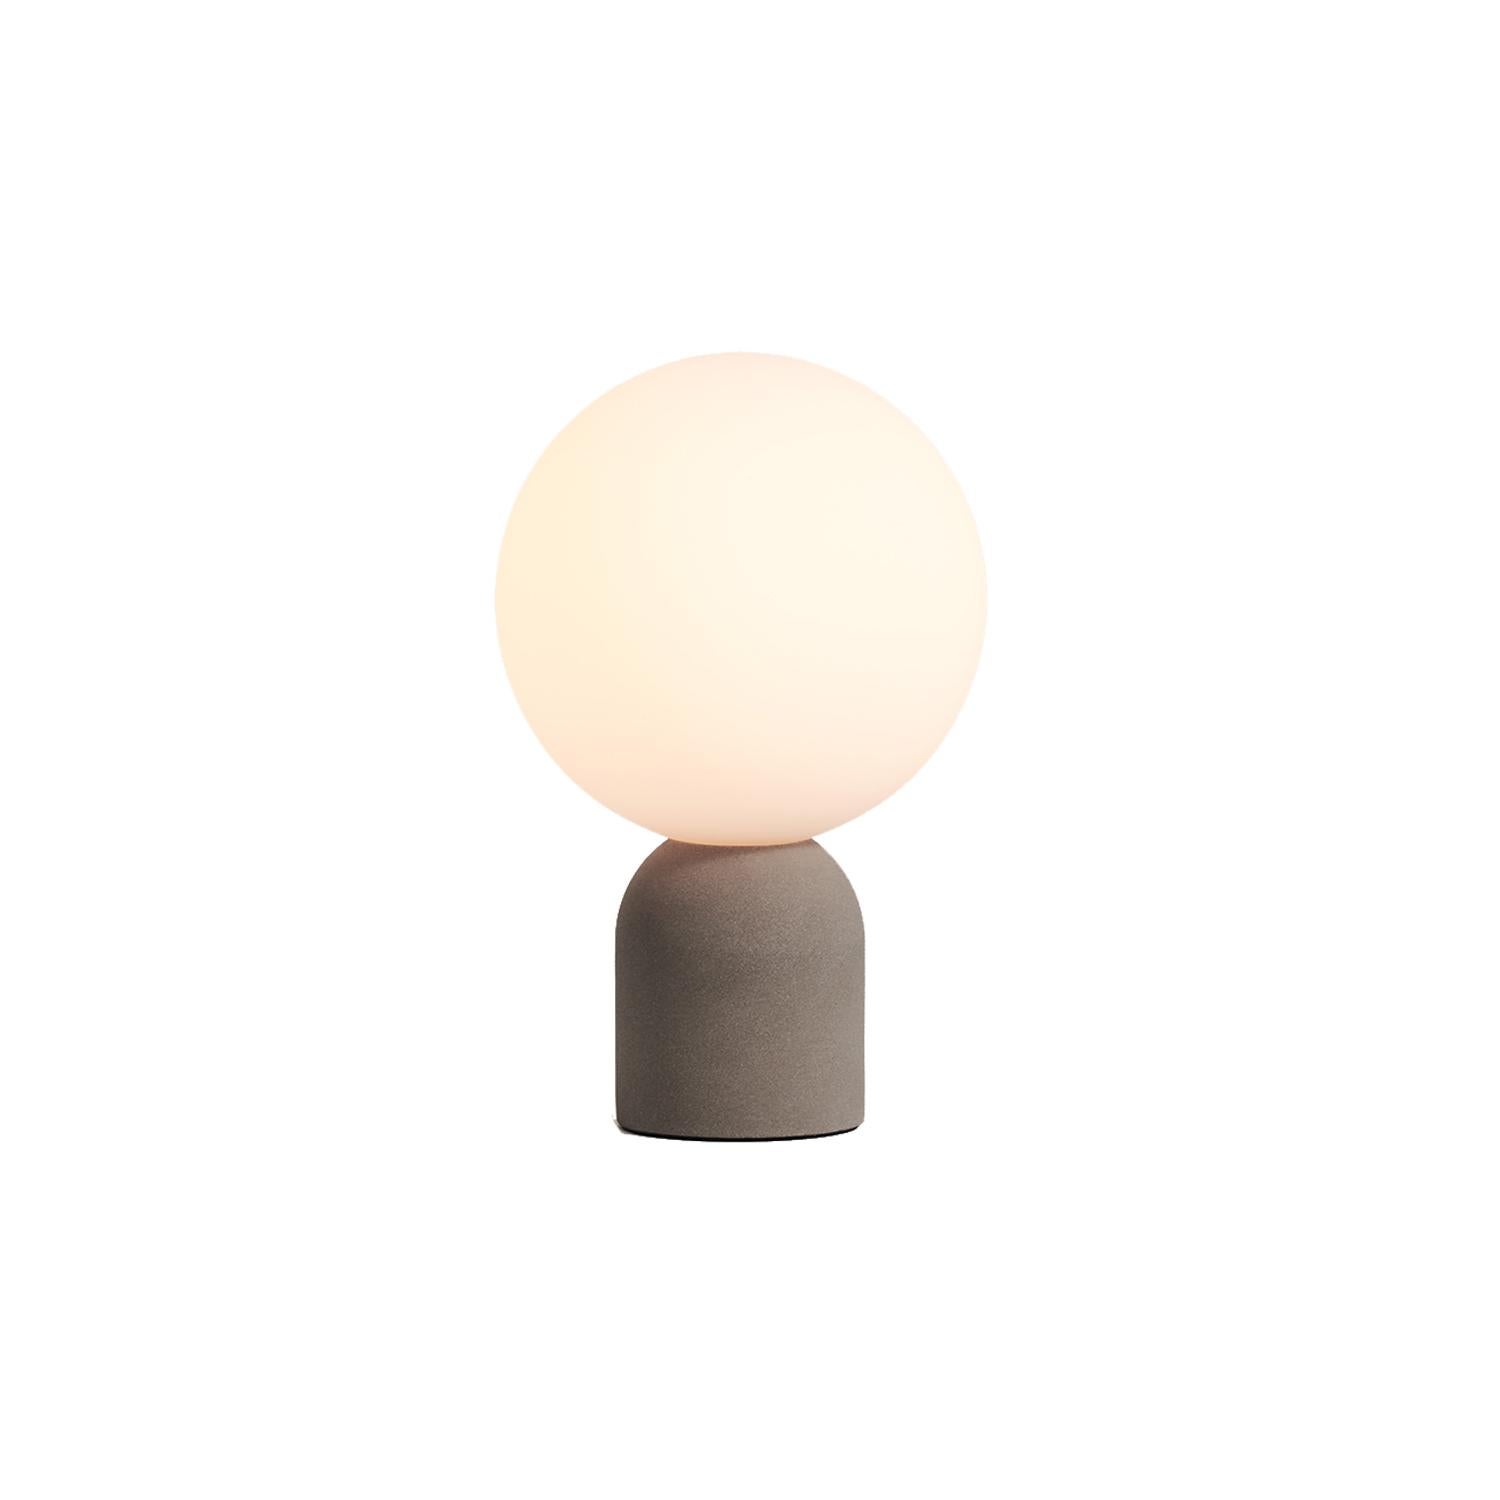 Staying steadfast with Seed Designs “Castle series” signature concrete finish, the Castle GLO pendant and table lamp is the newest addition to the ever-so popular Castle collection. The silky smooth texture of the glass sphere paired with the